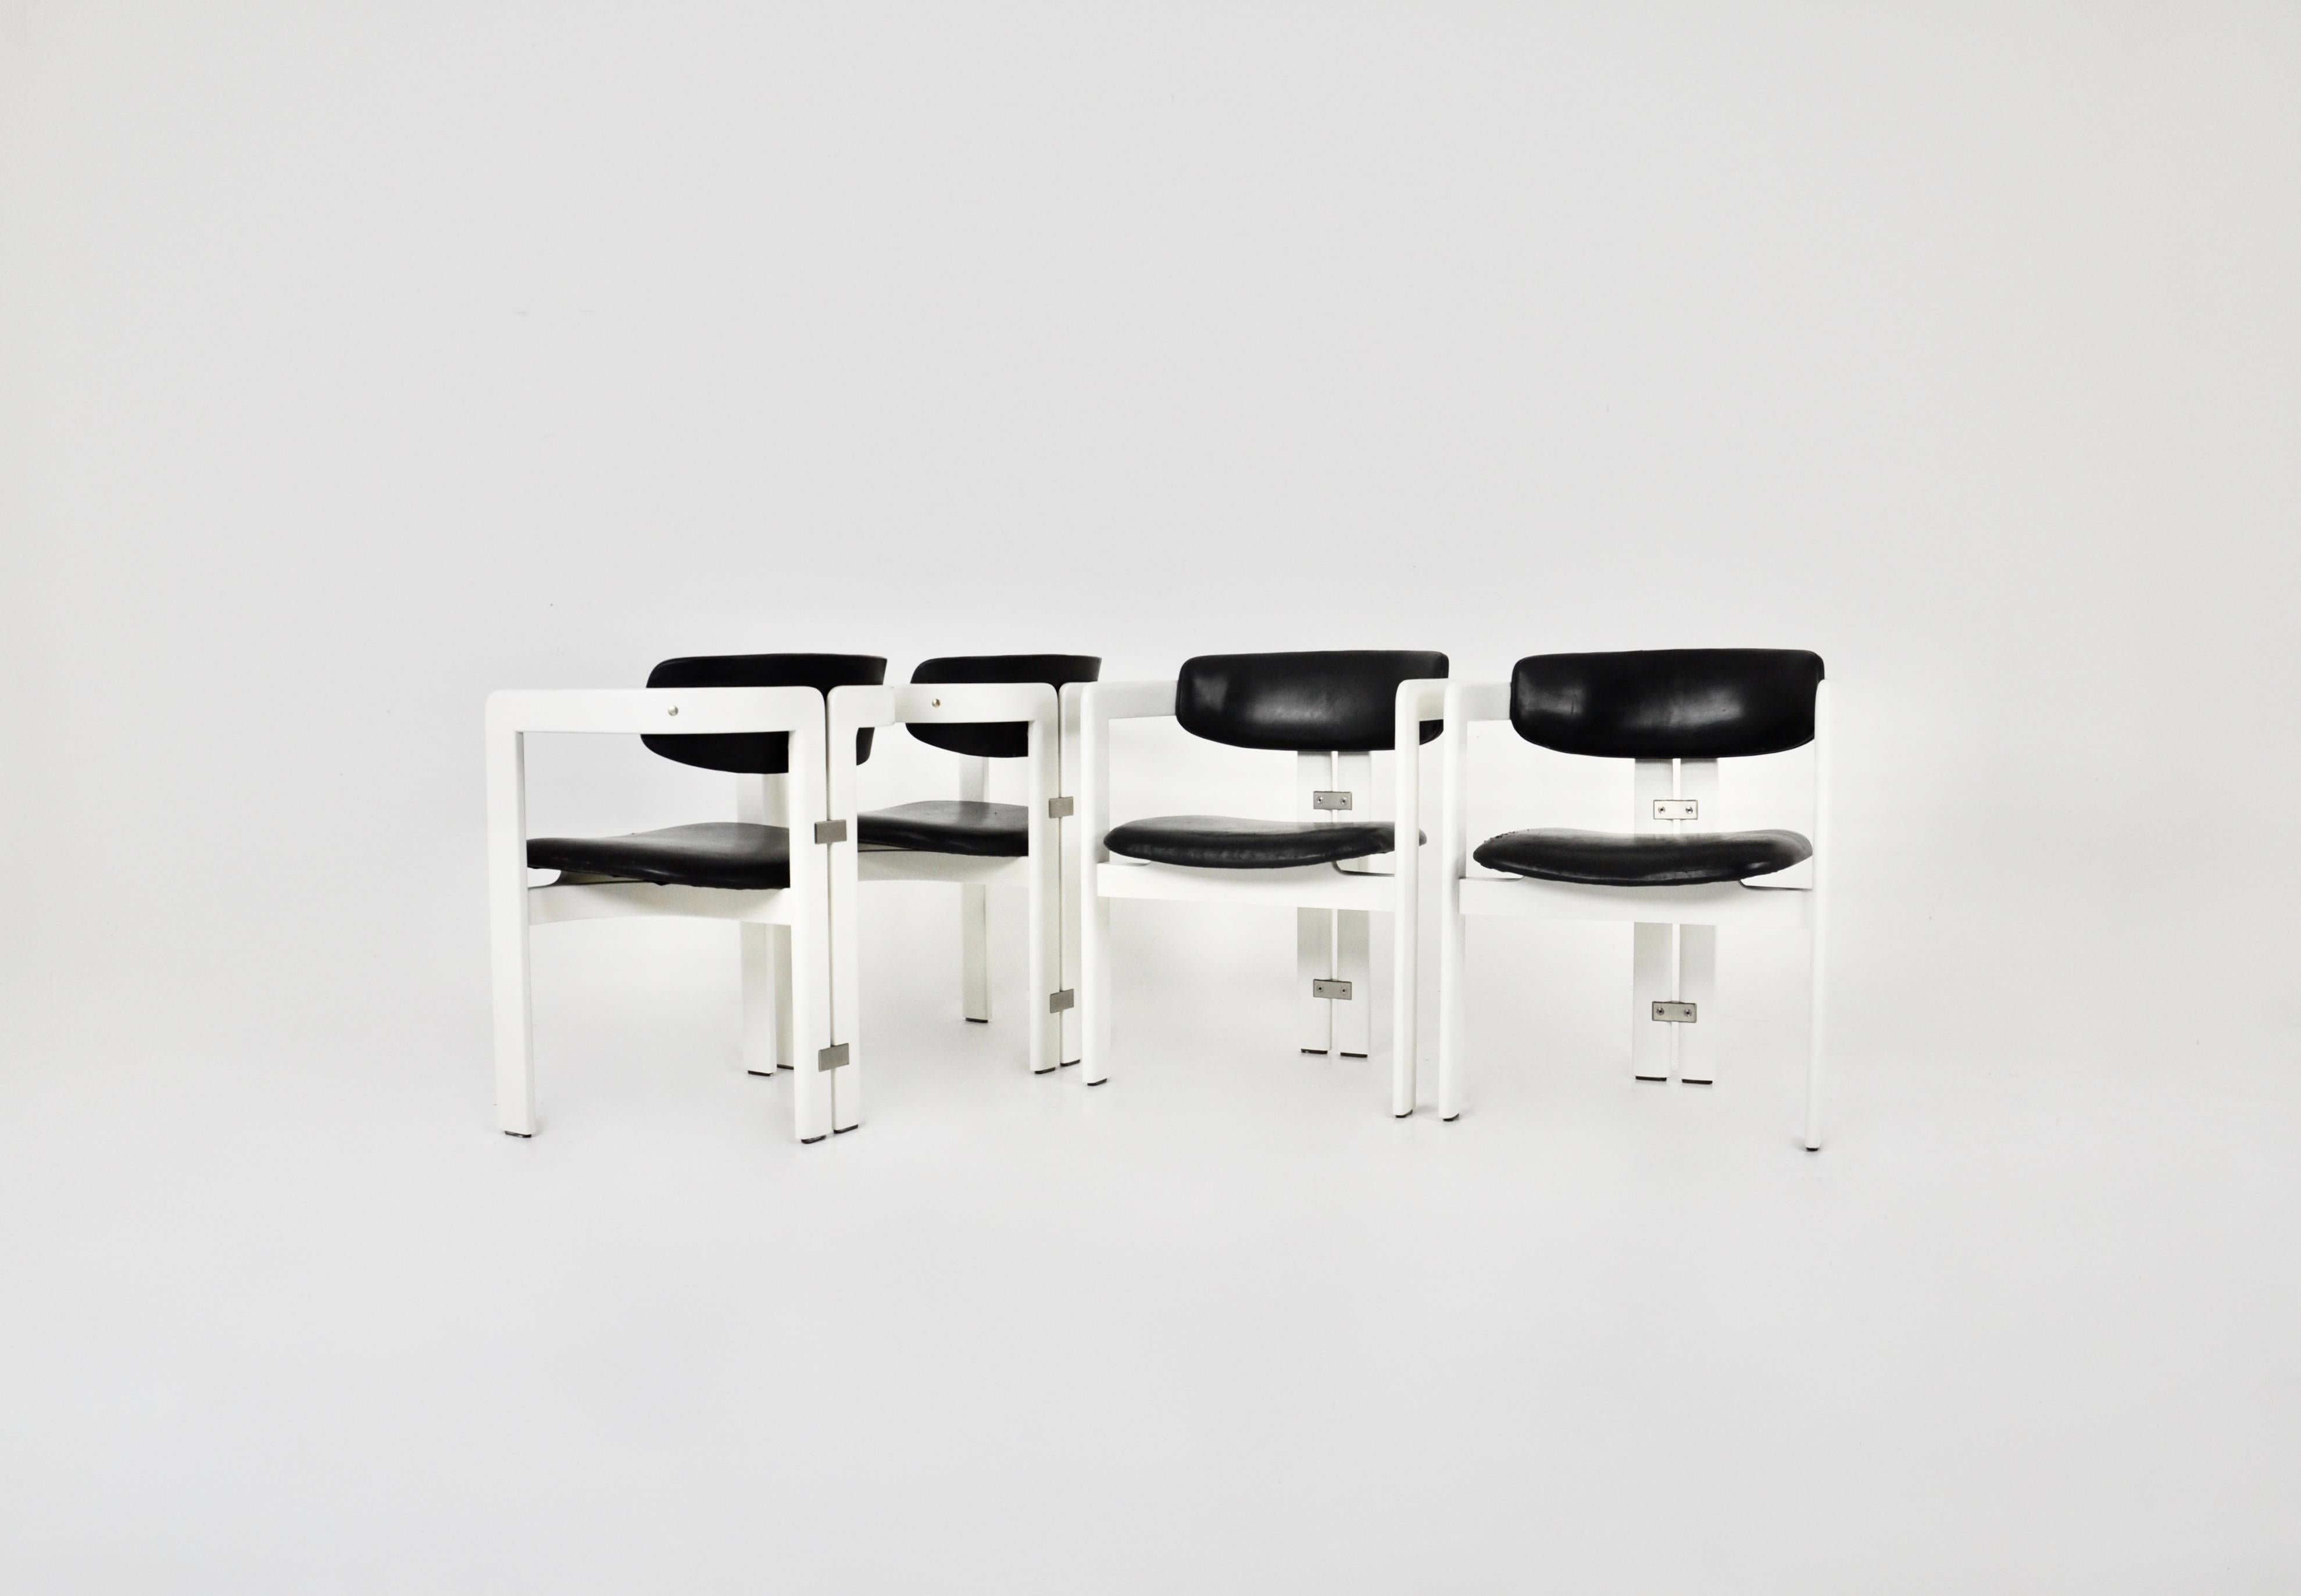 Set of 4 black and white wood and leather chairs by Augusto Savani for Pozzi. Model: Pamplona. Seat height: 44 cm Wear due to time and age of the chairs.